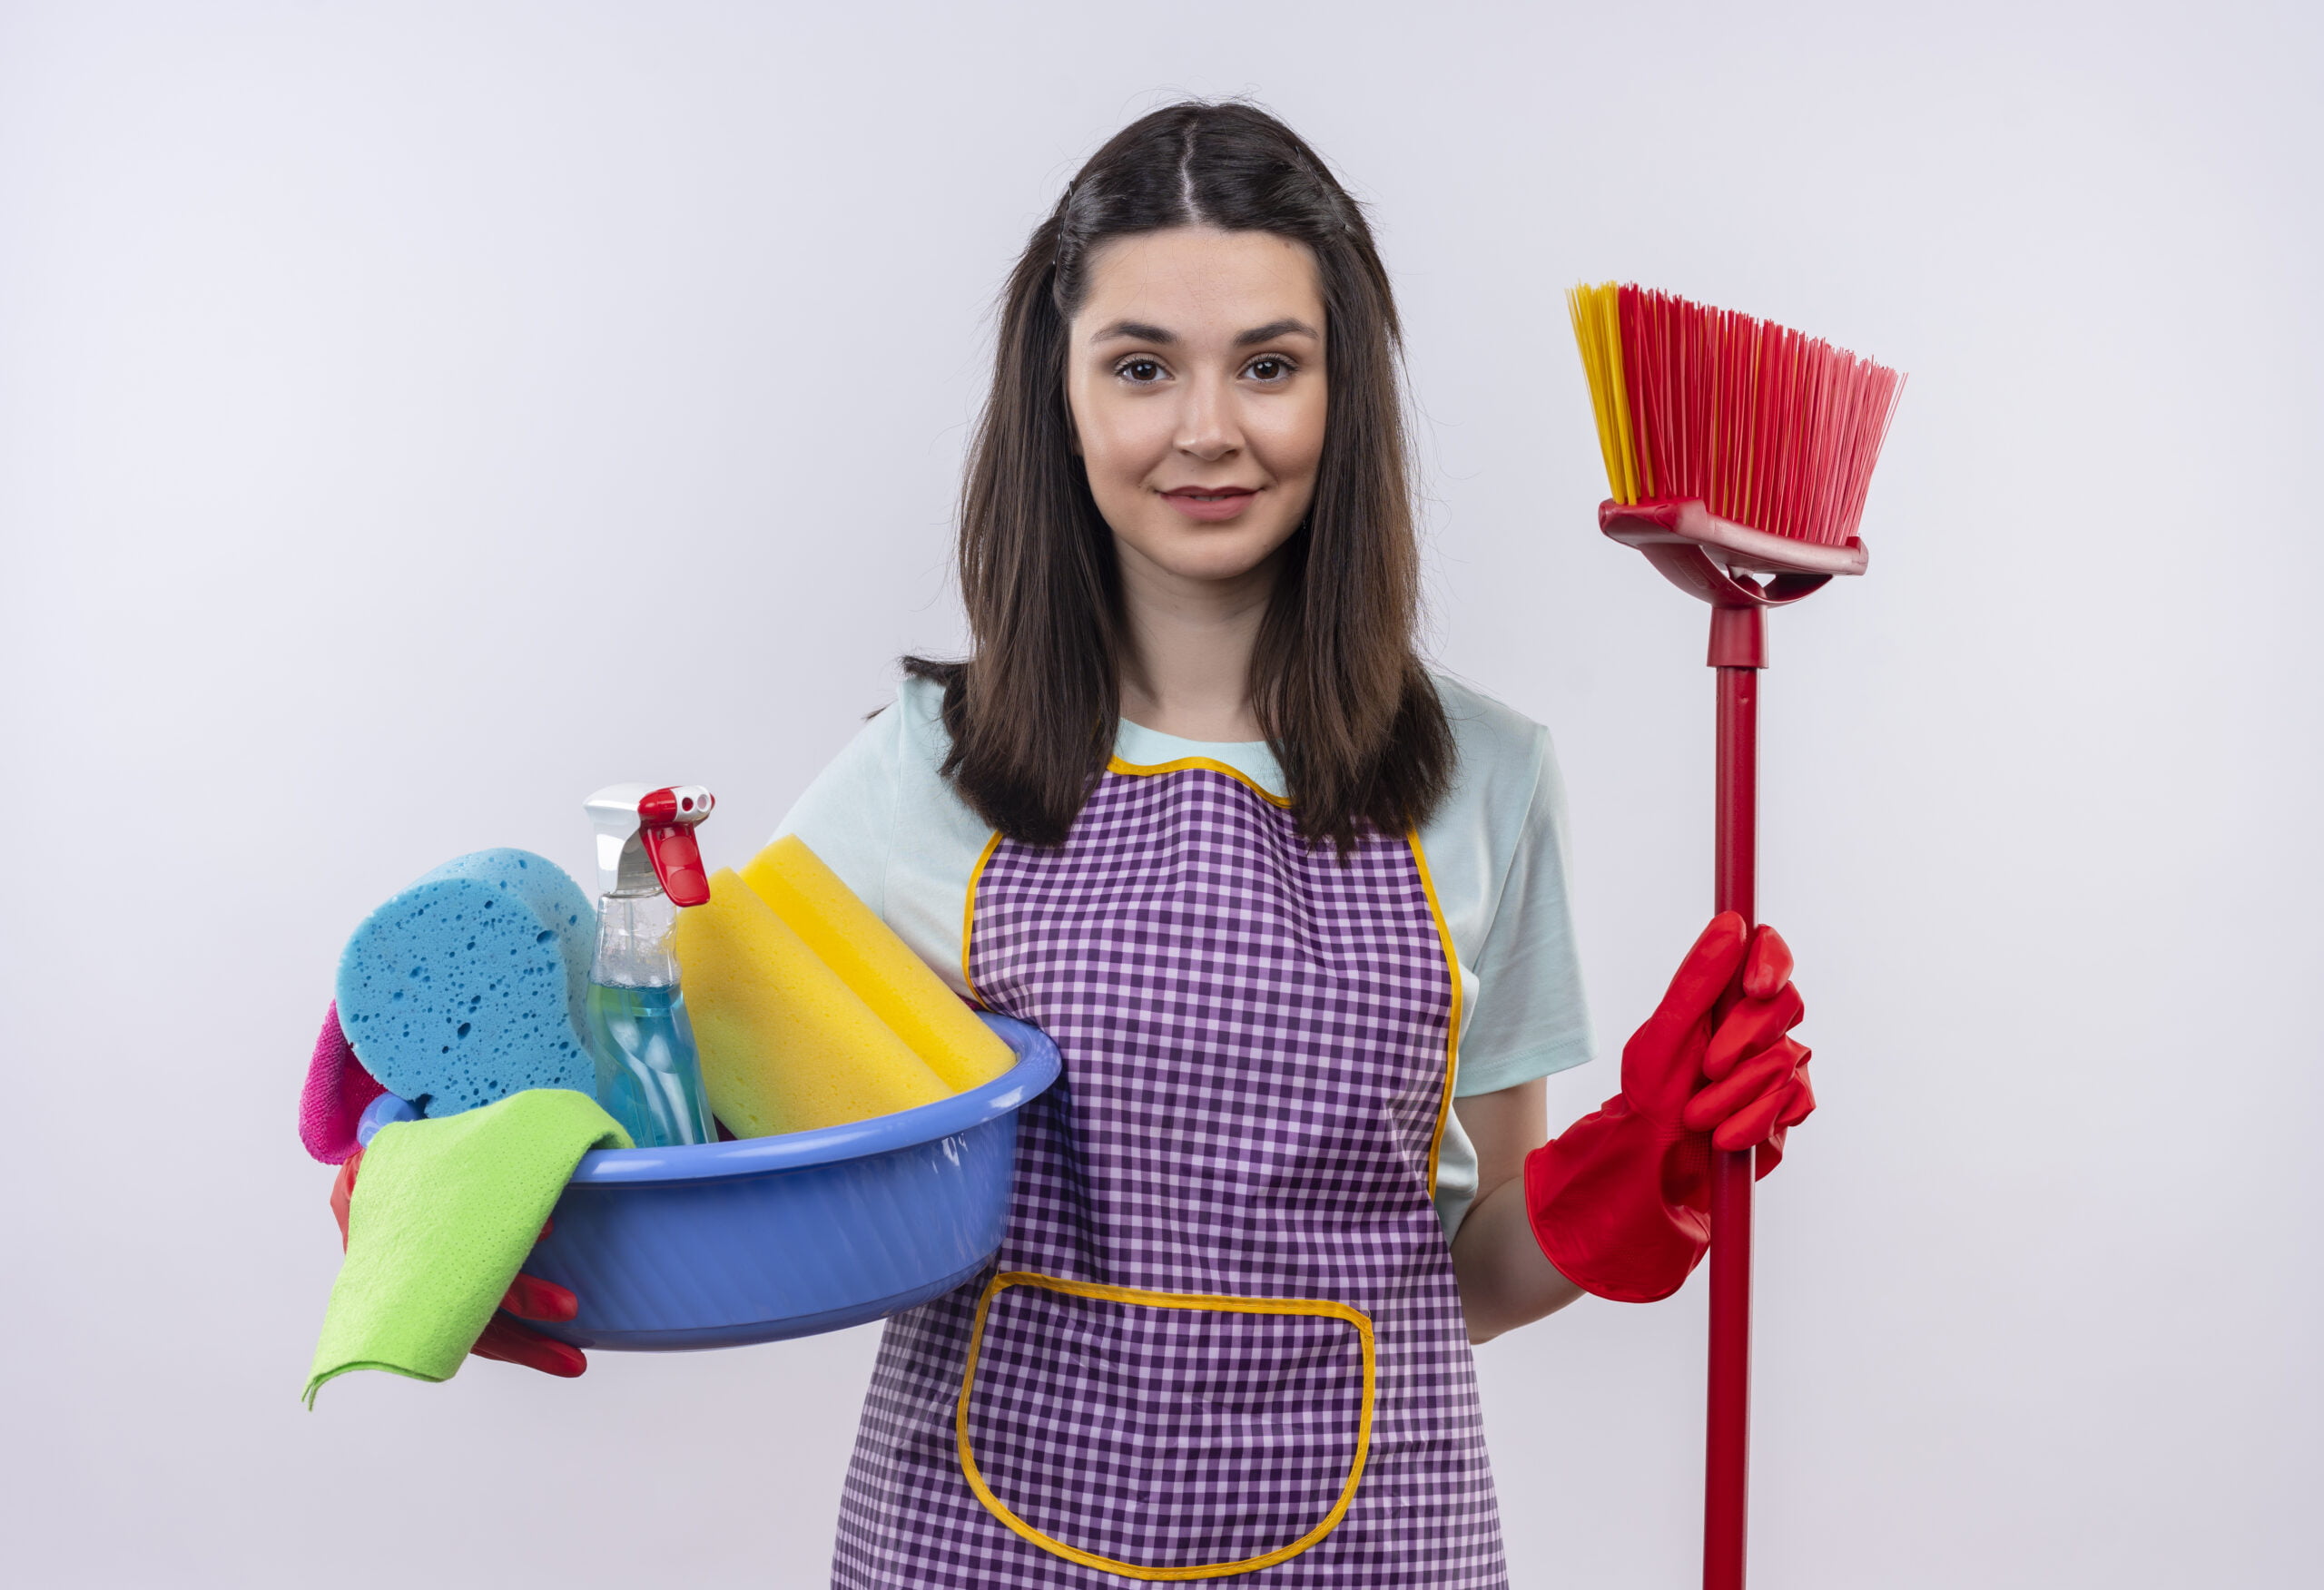 cleaning services pricing